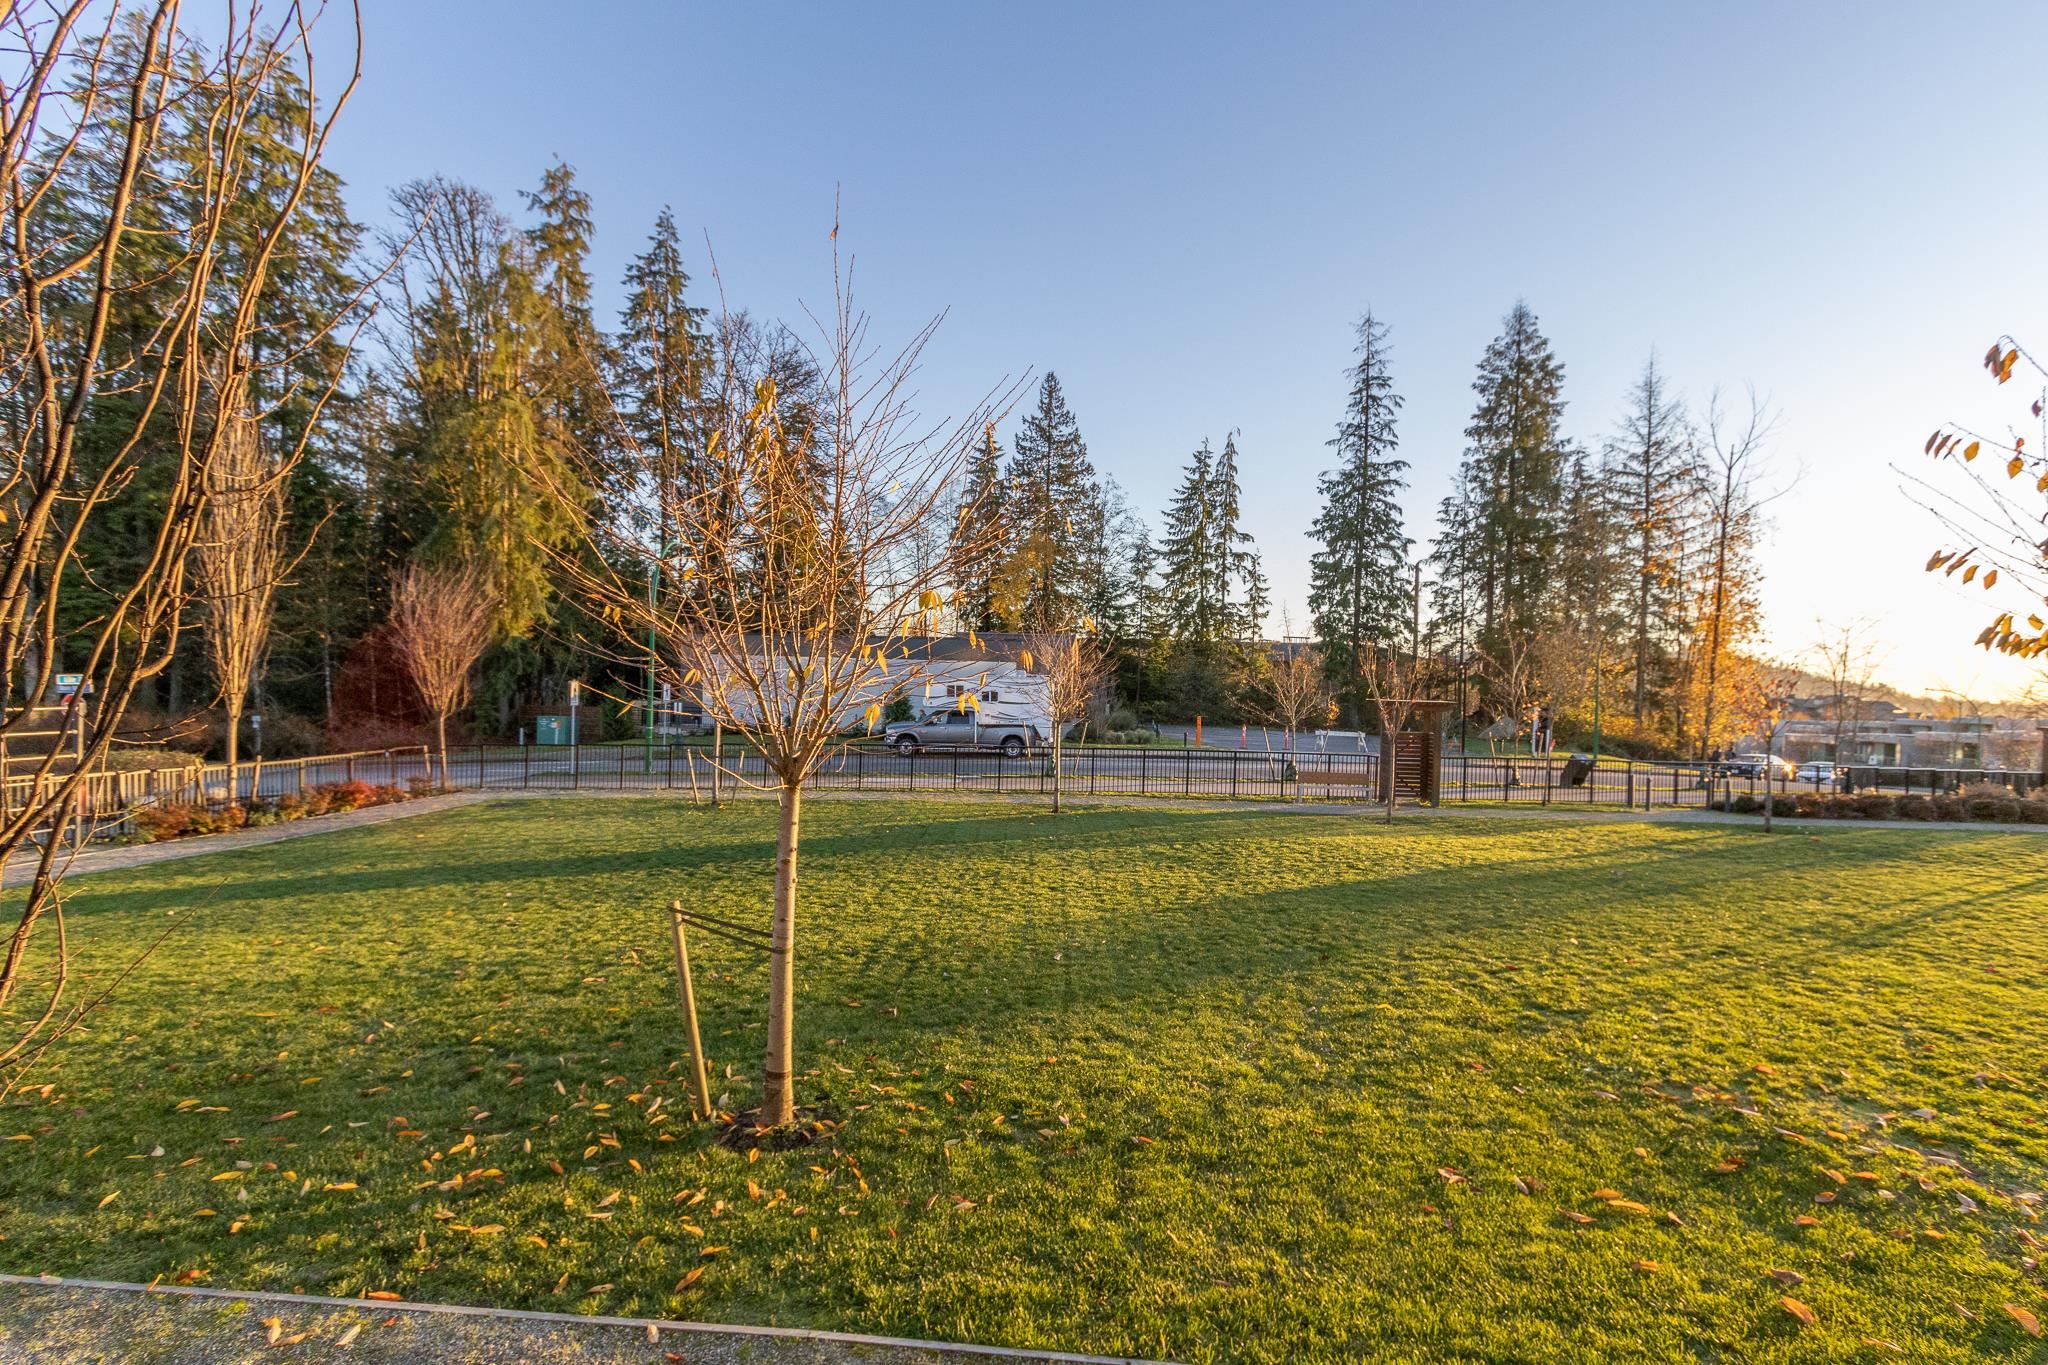 Listing image of 84 590 LILE DRIVE